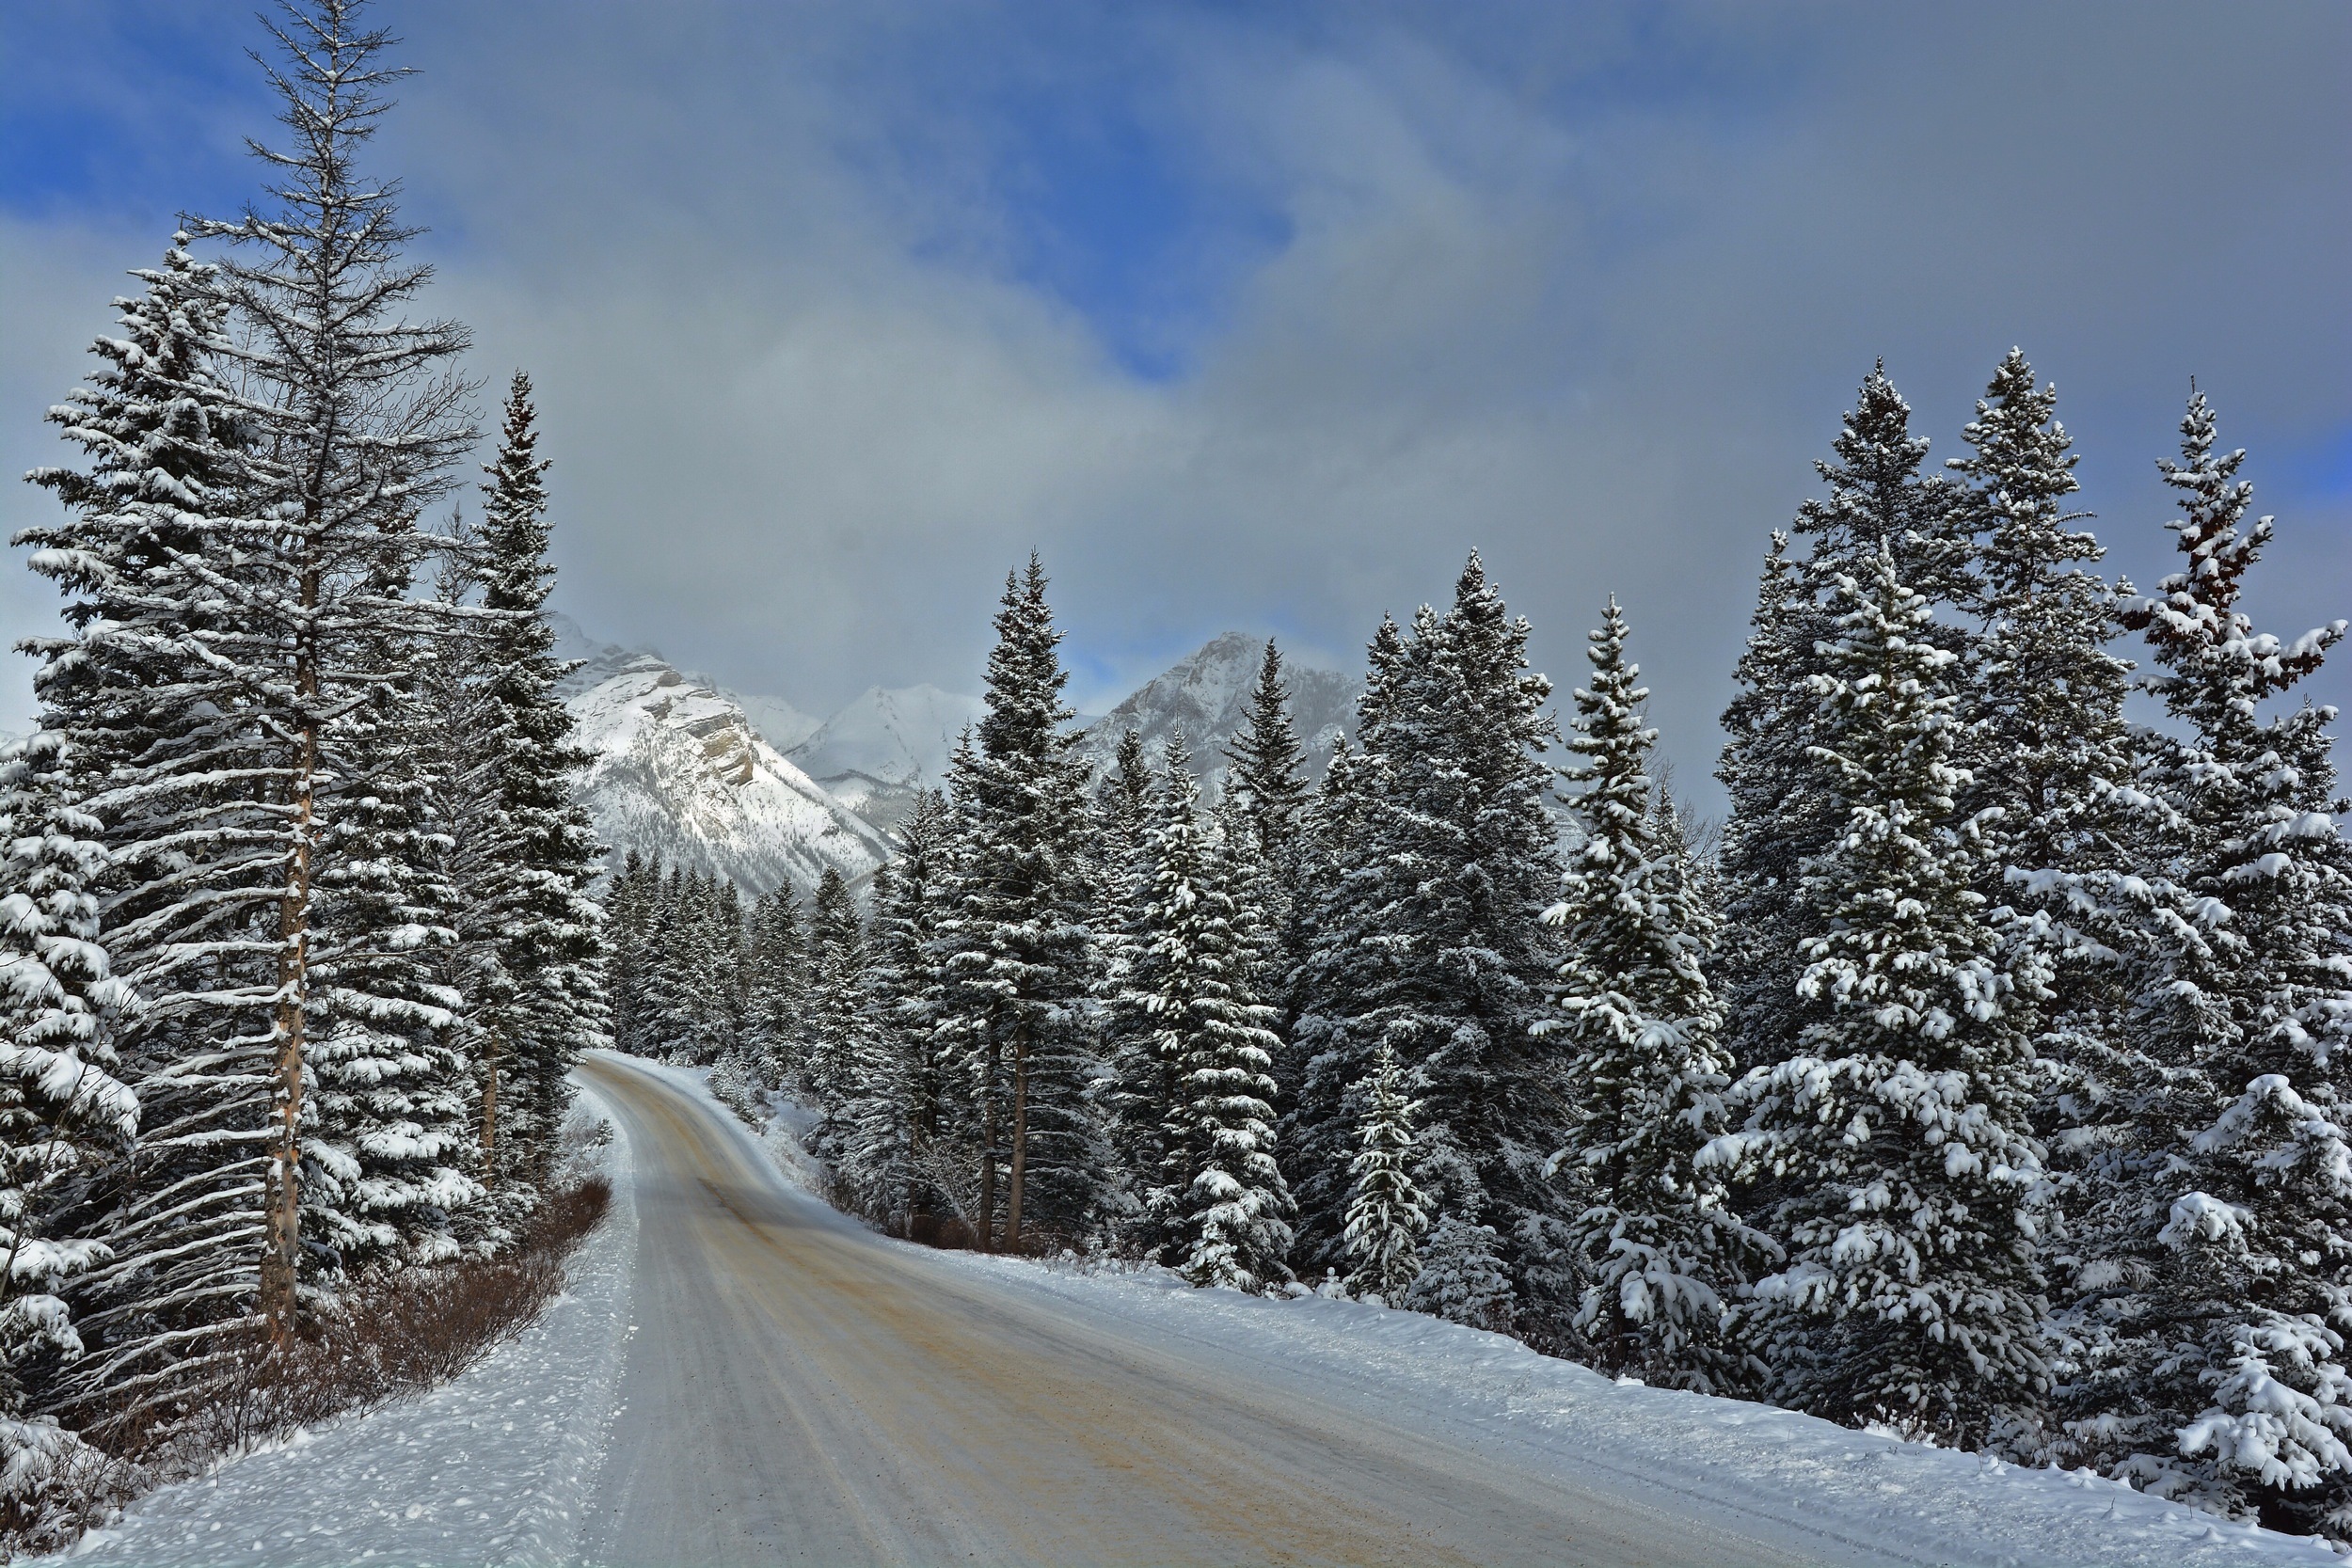 Download background road, man made, banff national park, canada, landscape, mountain, pine, snow, tree, winter